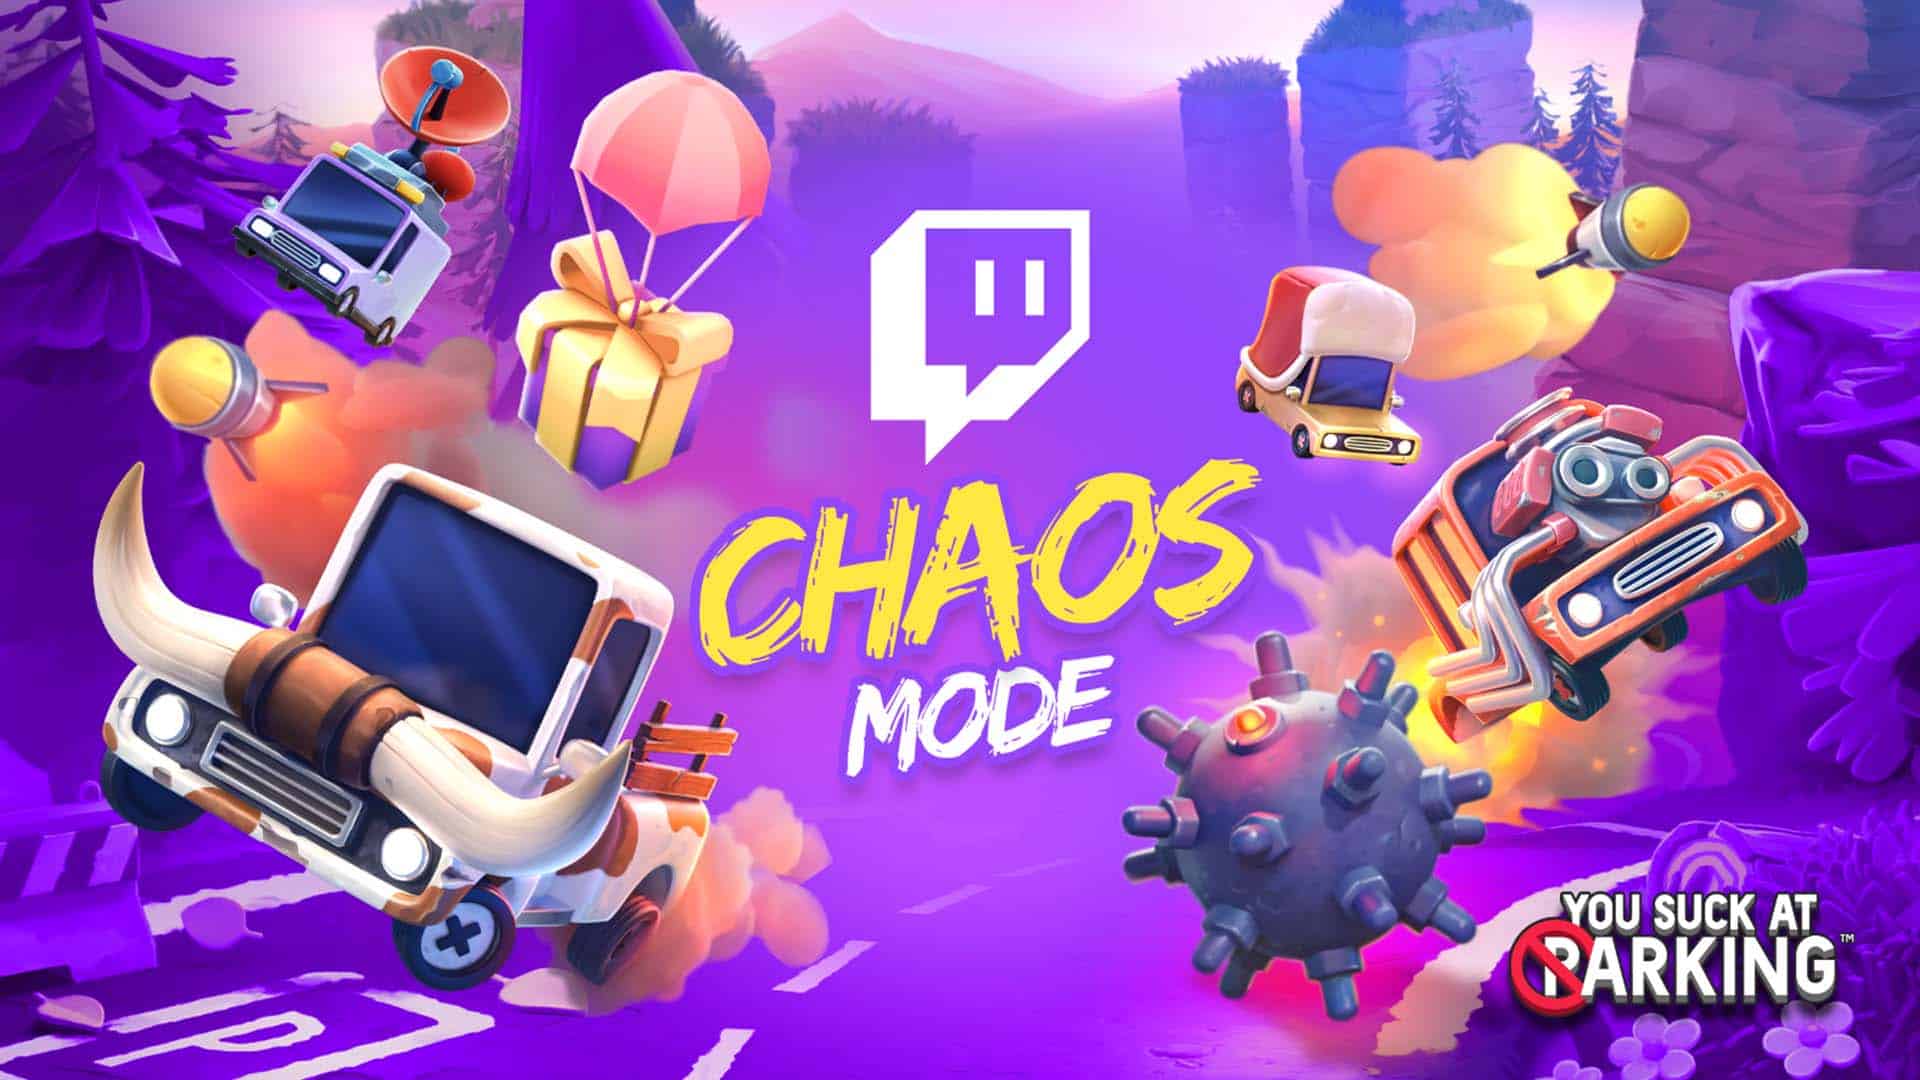 You Suck at Parking Chaos Mode Graphic